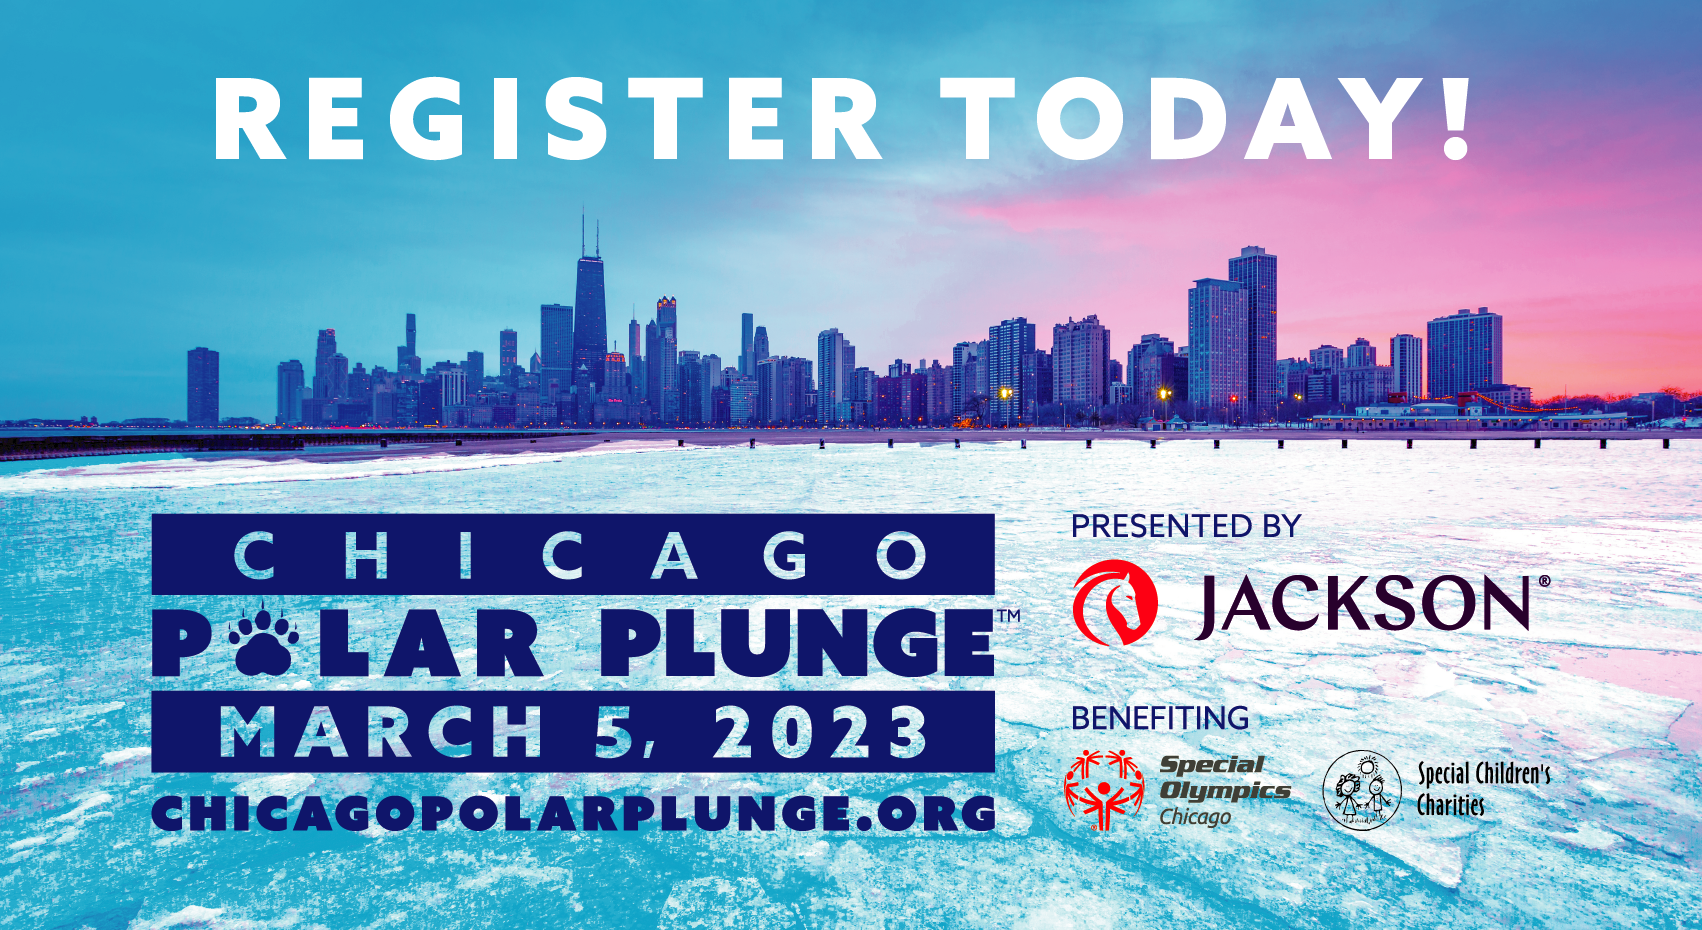 Register today! The Chicago Polar Plunge presented by Jackson